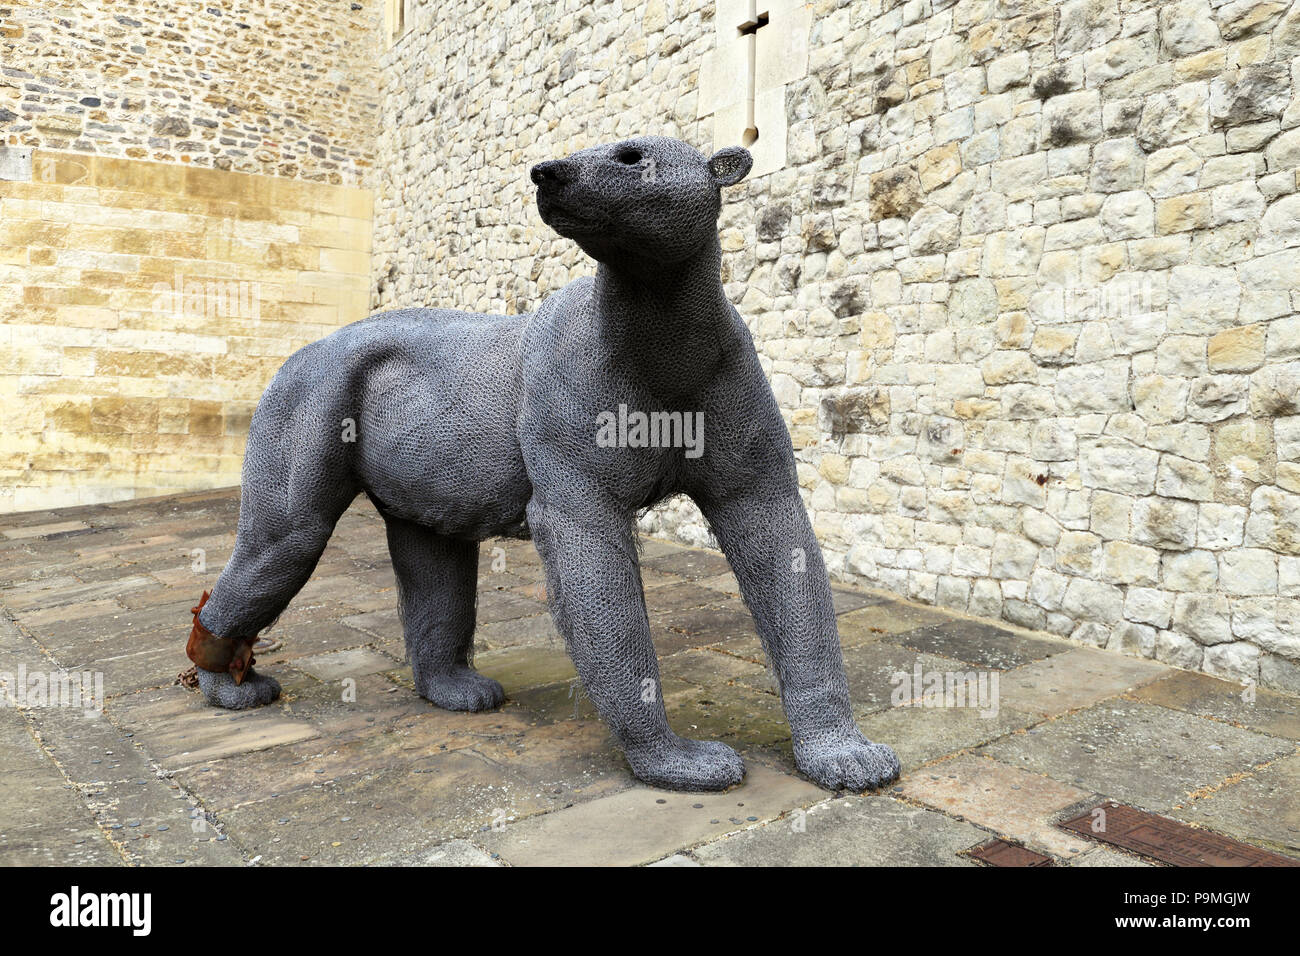 Wire animal sculptures at the Tower of London created by sculptor Kendra Haste, are a nod to the heritage of the Tower. Medieval Kings around Europe u Stock Photo